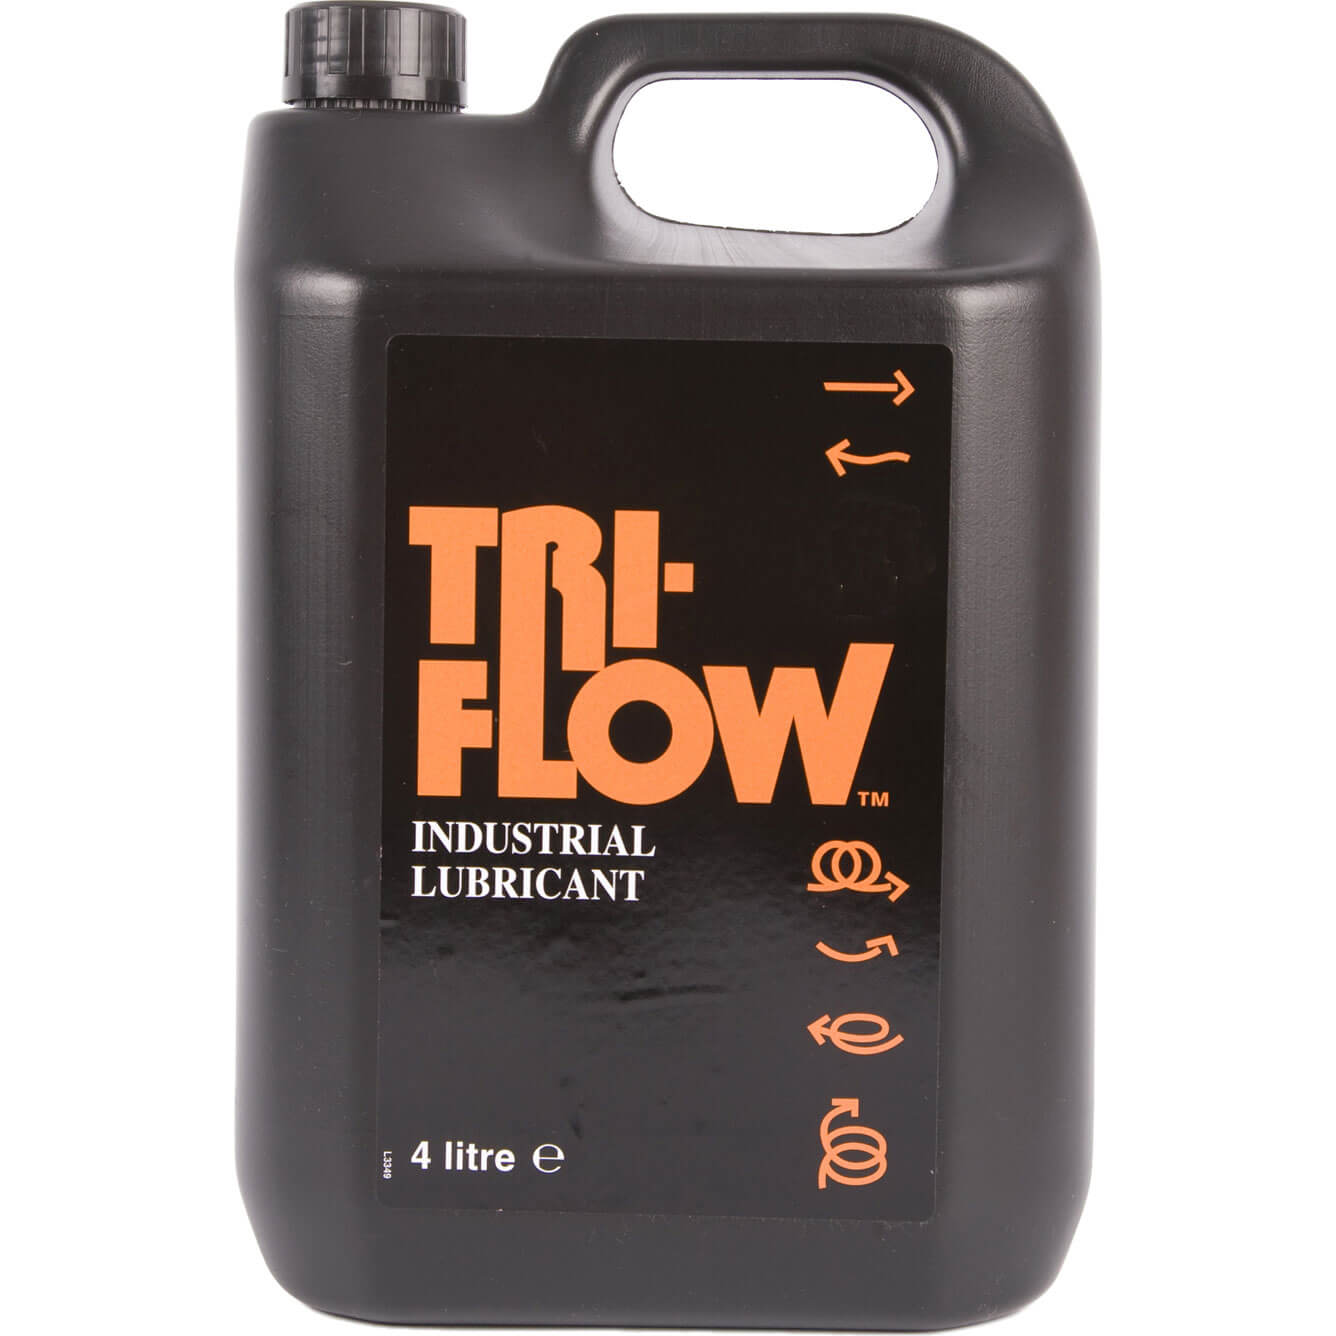 Triflow Industrial Lubricant with PTFE 4 Litre